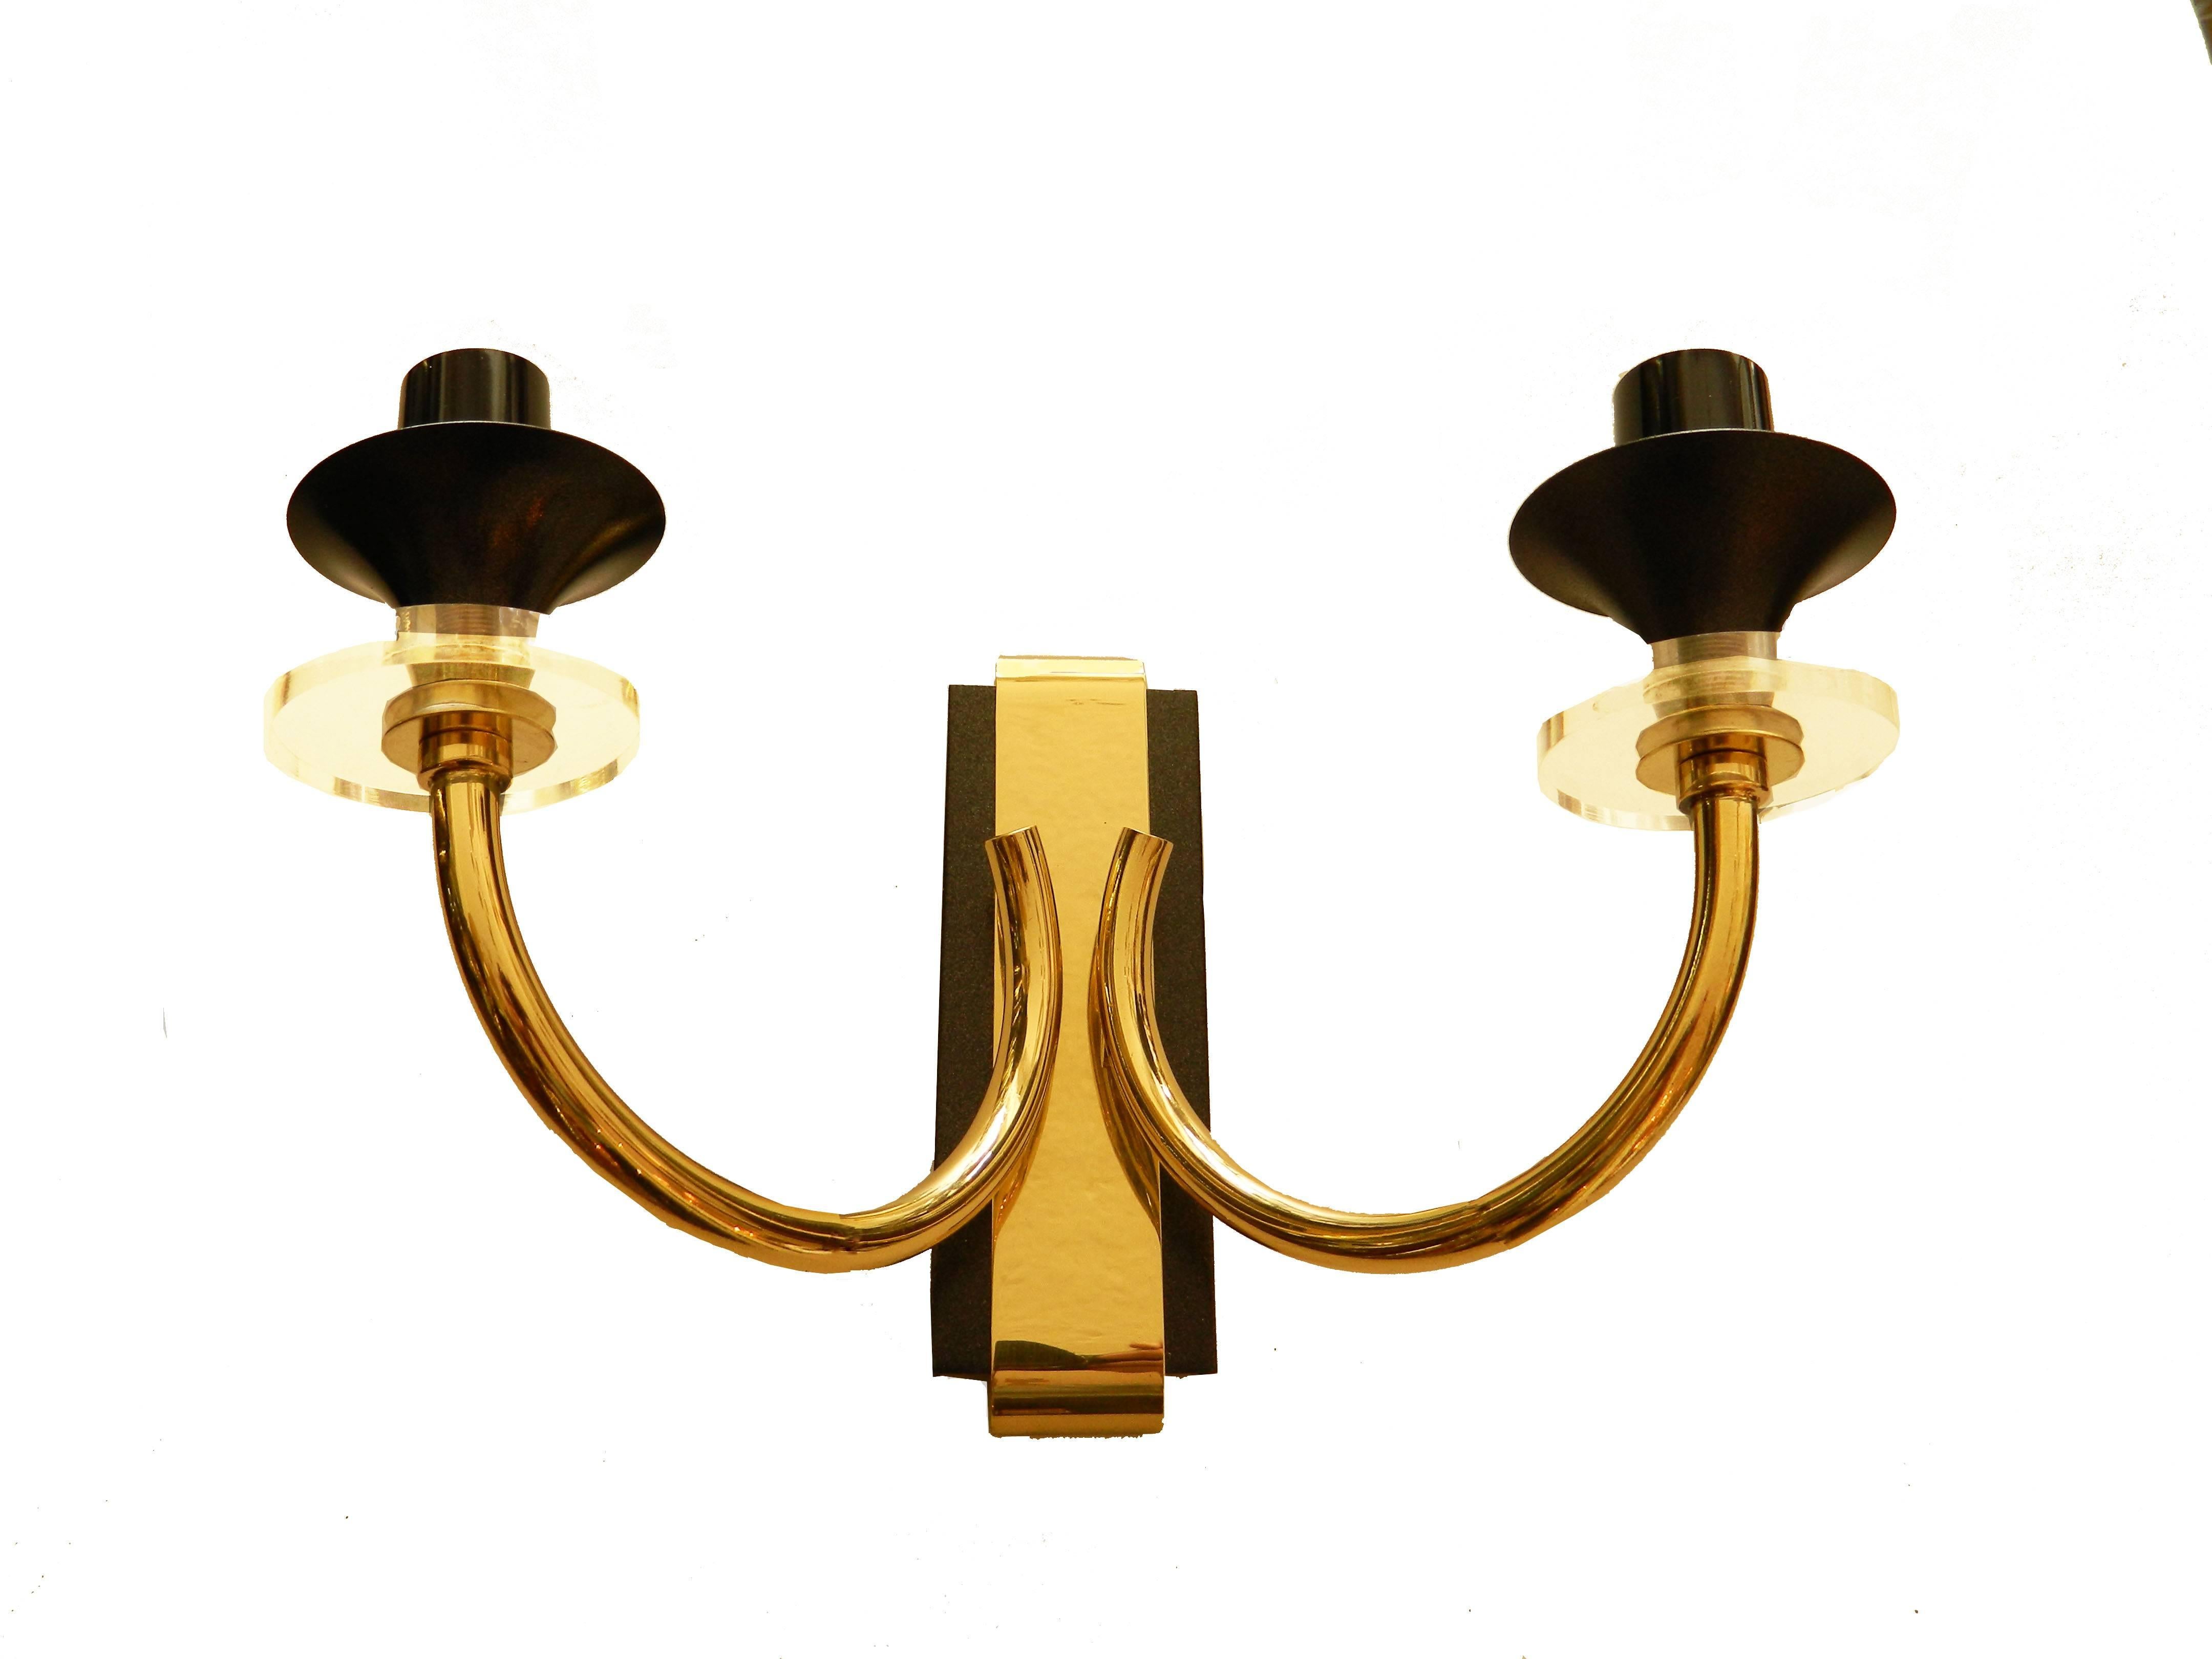 French Maison Jansen style Sconces, Wall Lights Brass & Lucite mid century modern Pair  For Sale